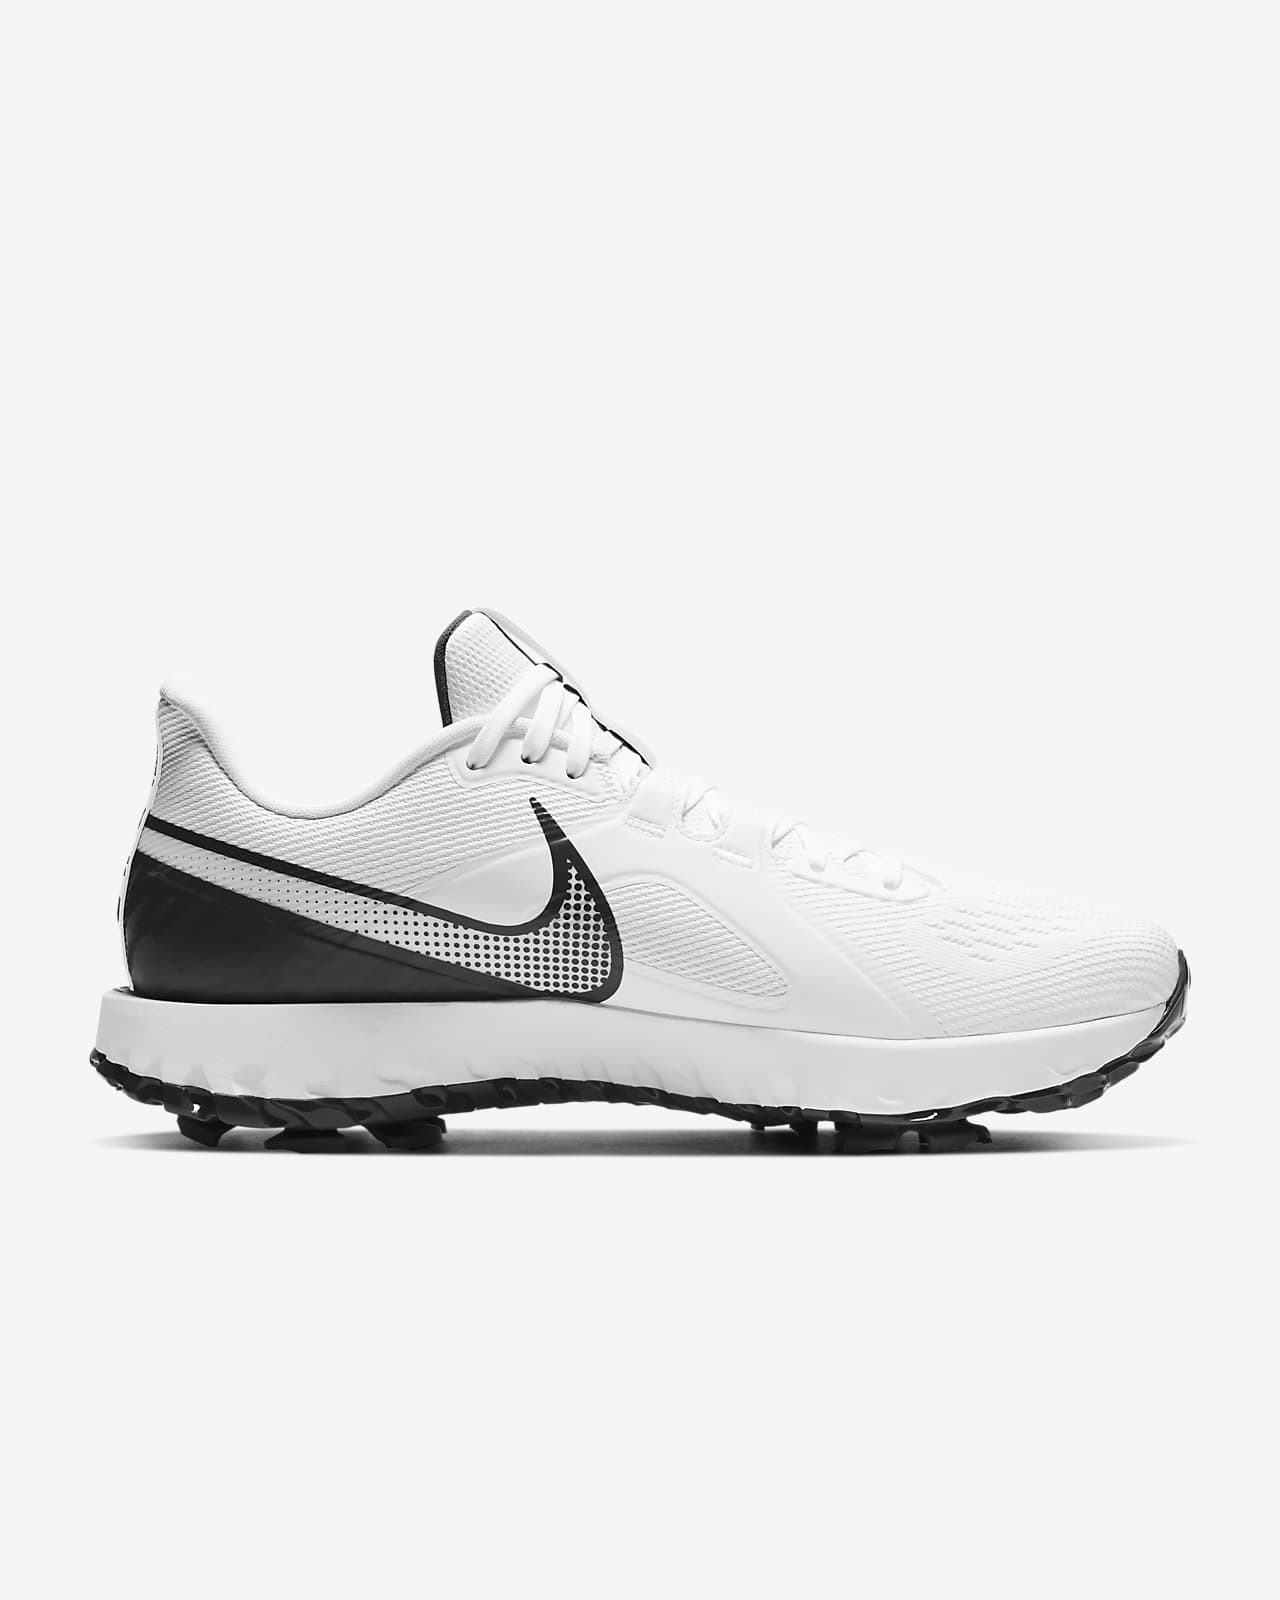 react golf shoes